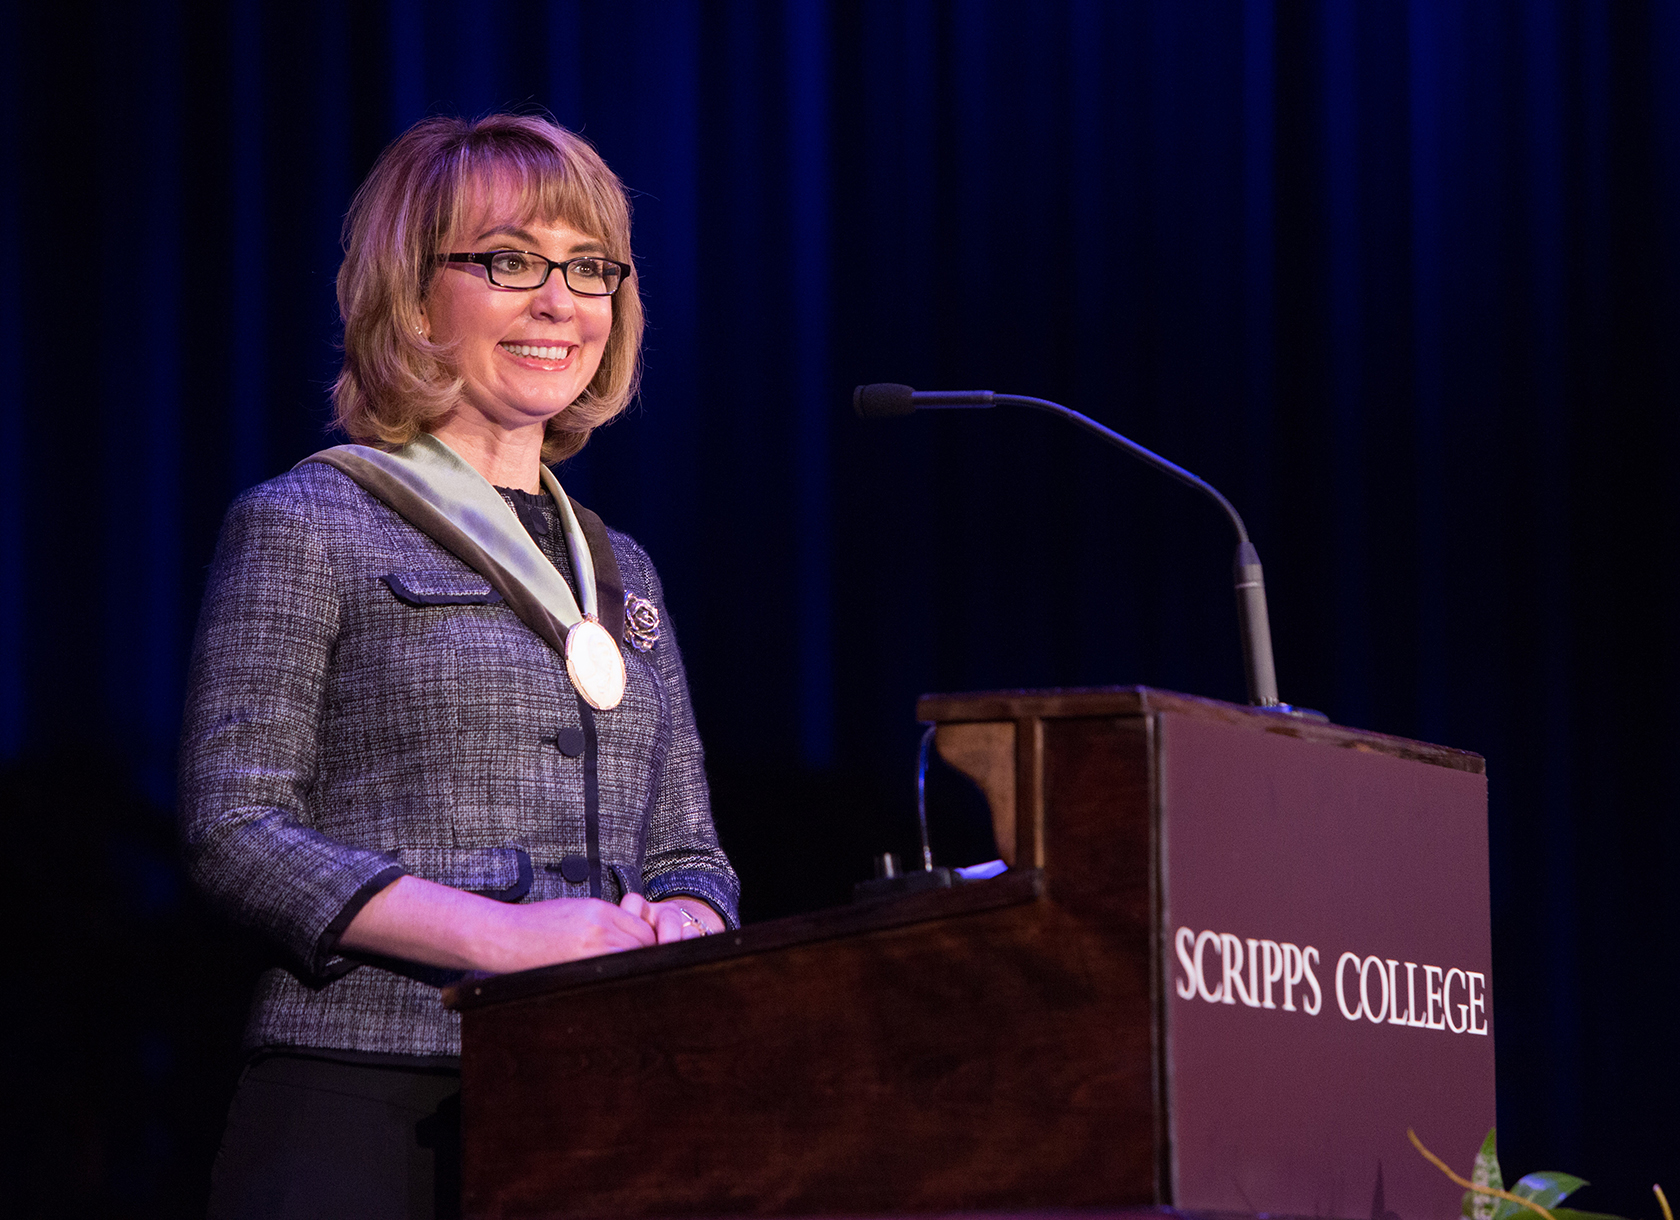 A white woman with short blonde hair and glasses stands behind a Scripps College podium